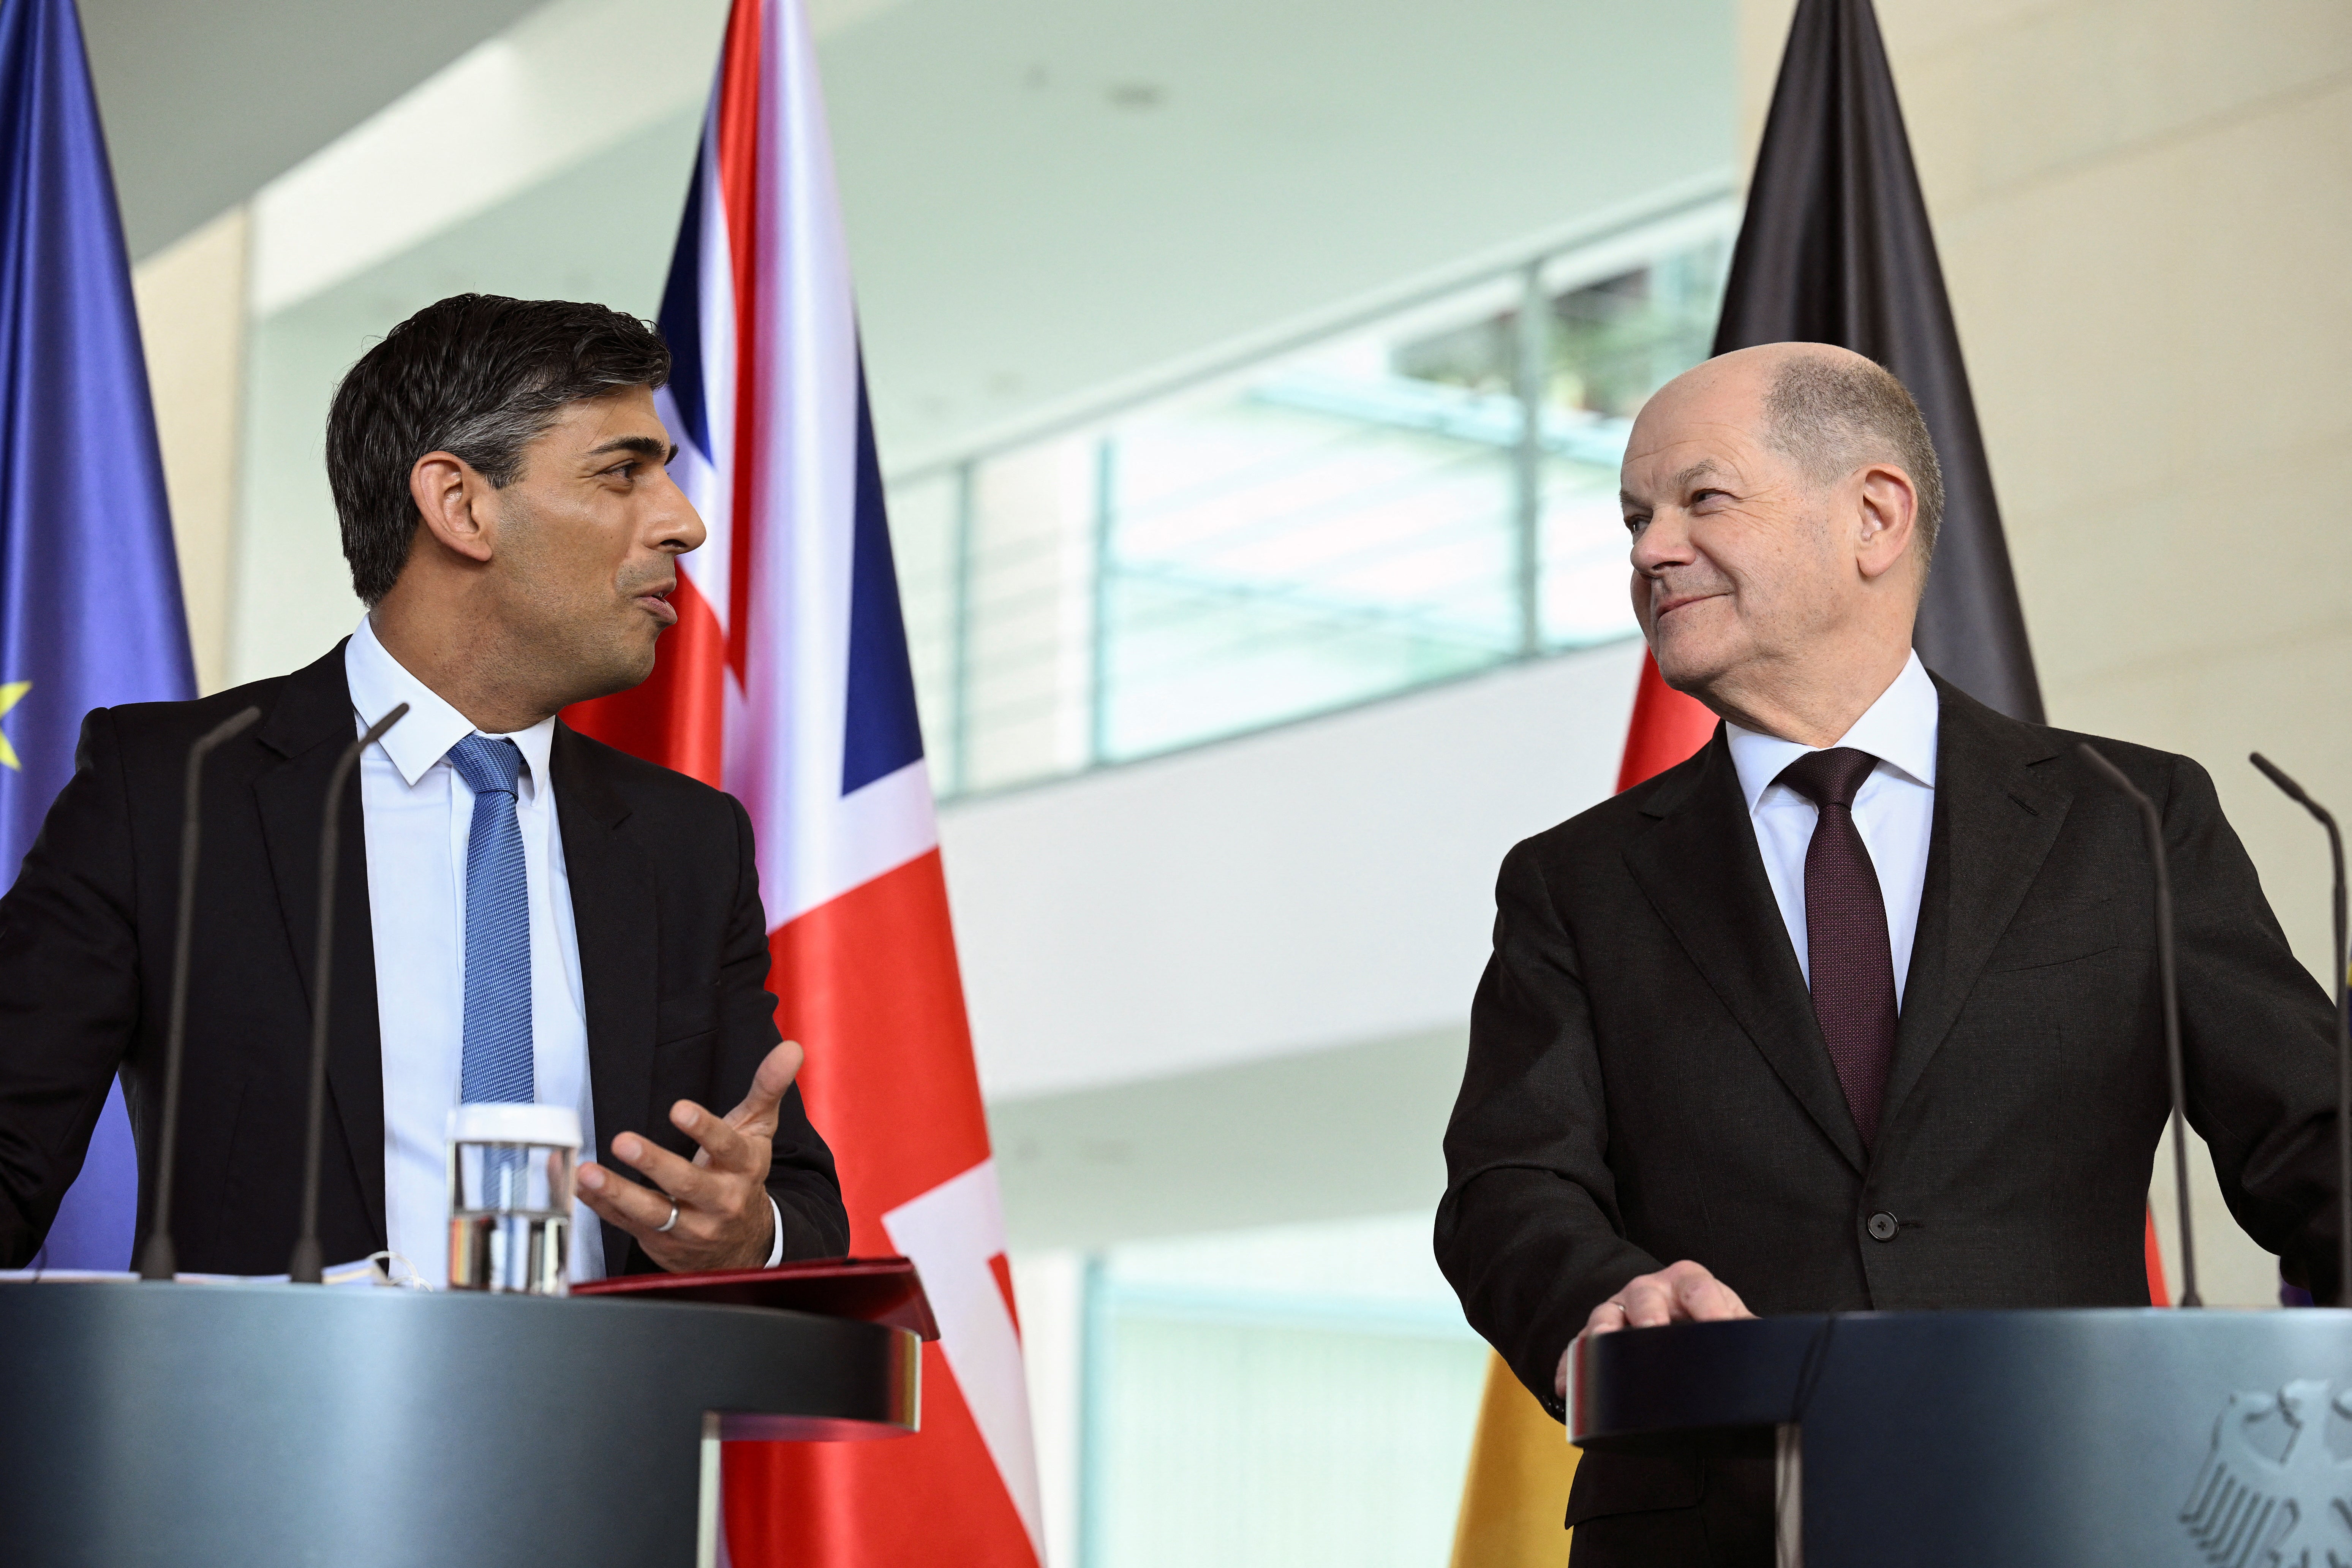 Joint press conference between Sunak and Scholz